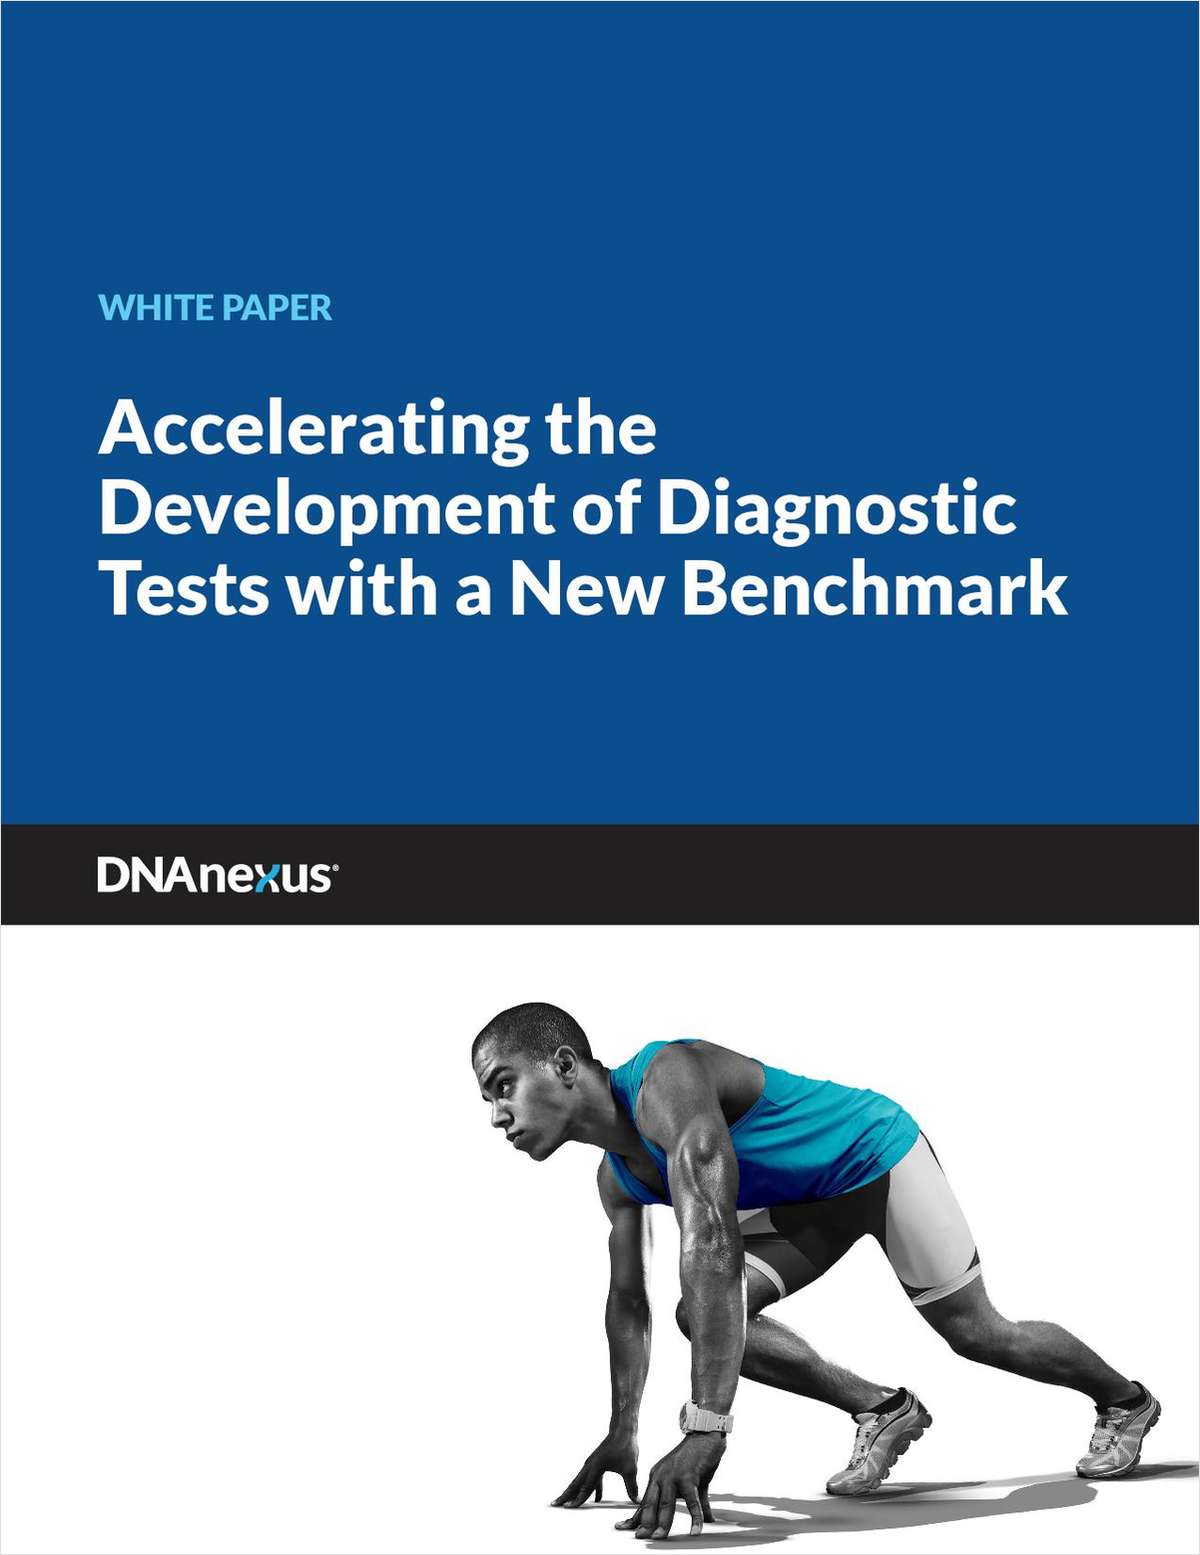 Accelerating the Development of Diagnostic Tests with a New Benchmark